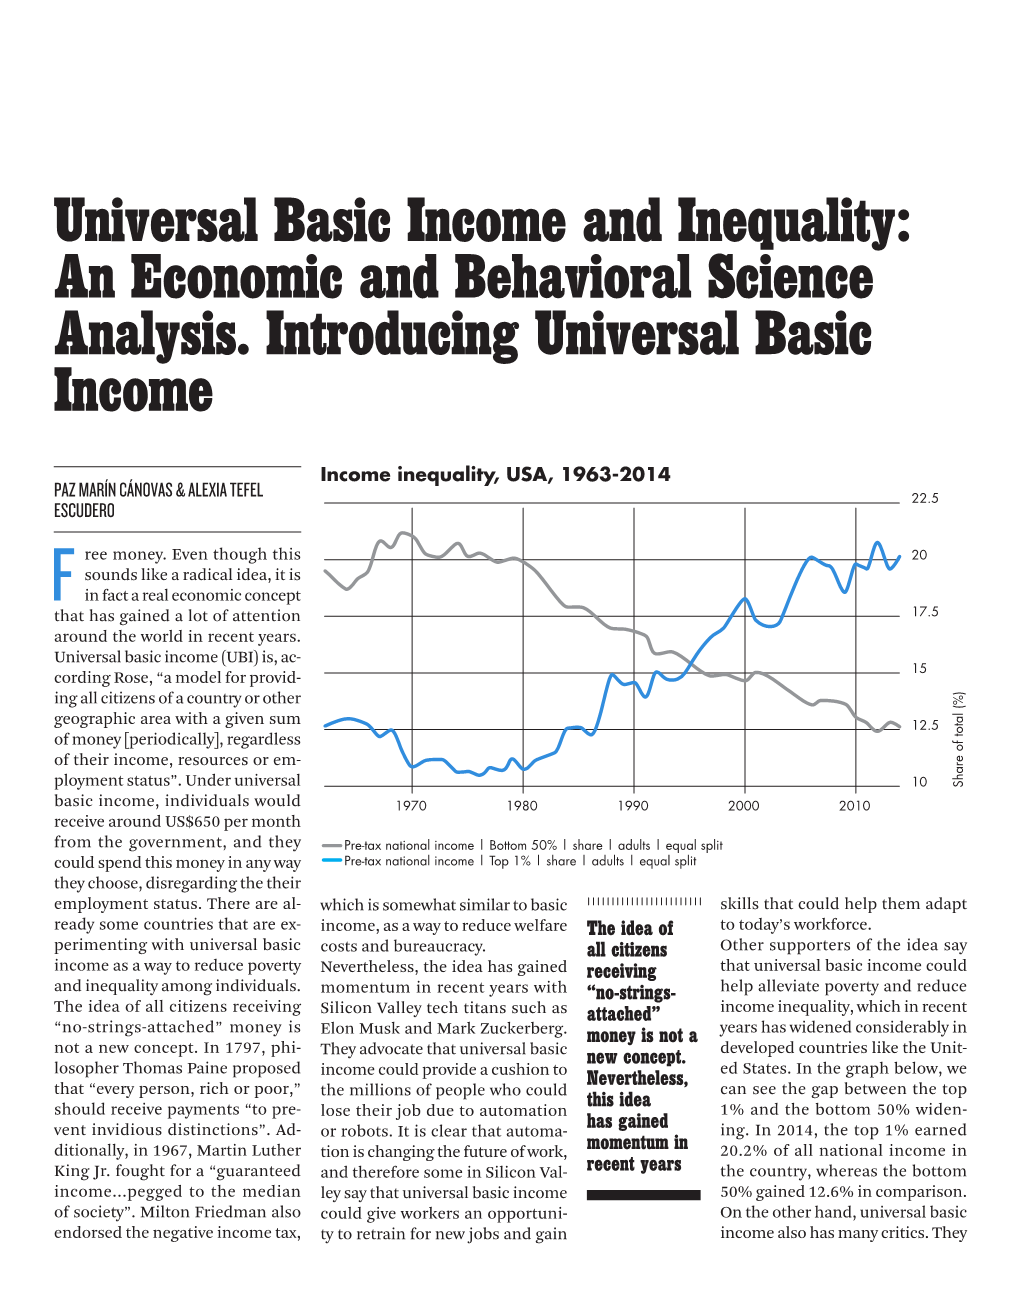 Universal Basic Income and Inequality: an Economic and Behavioral Science Analysis